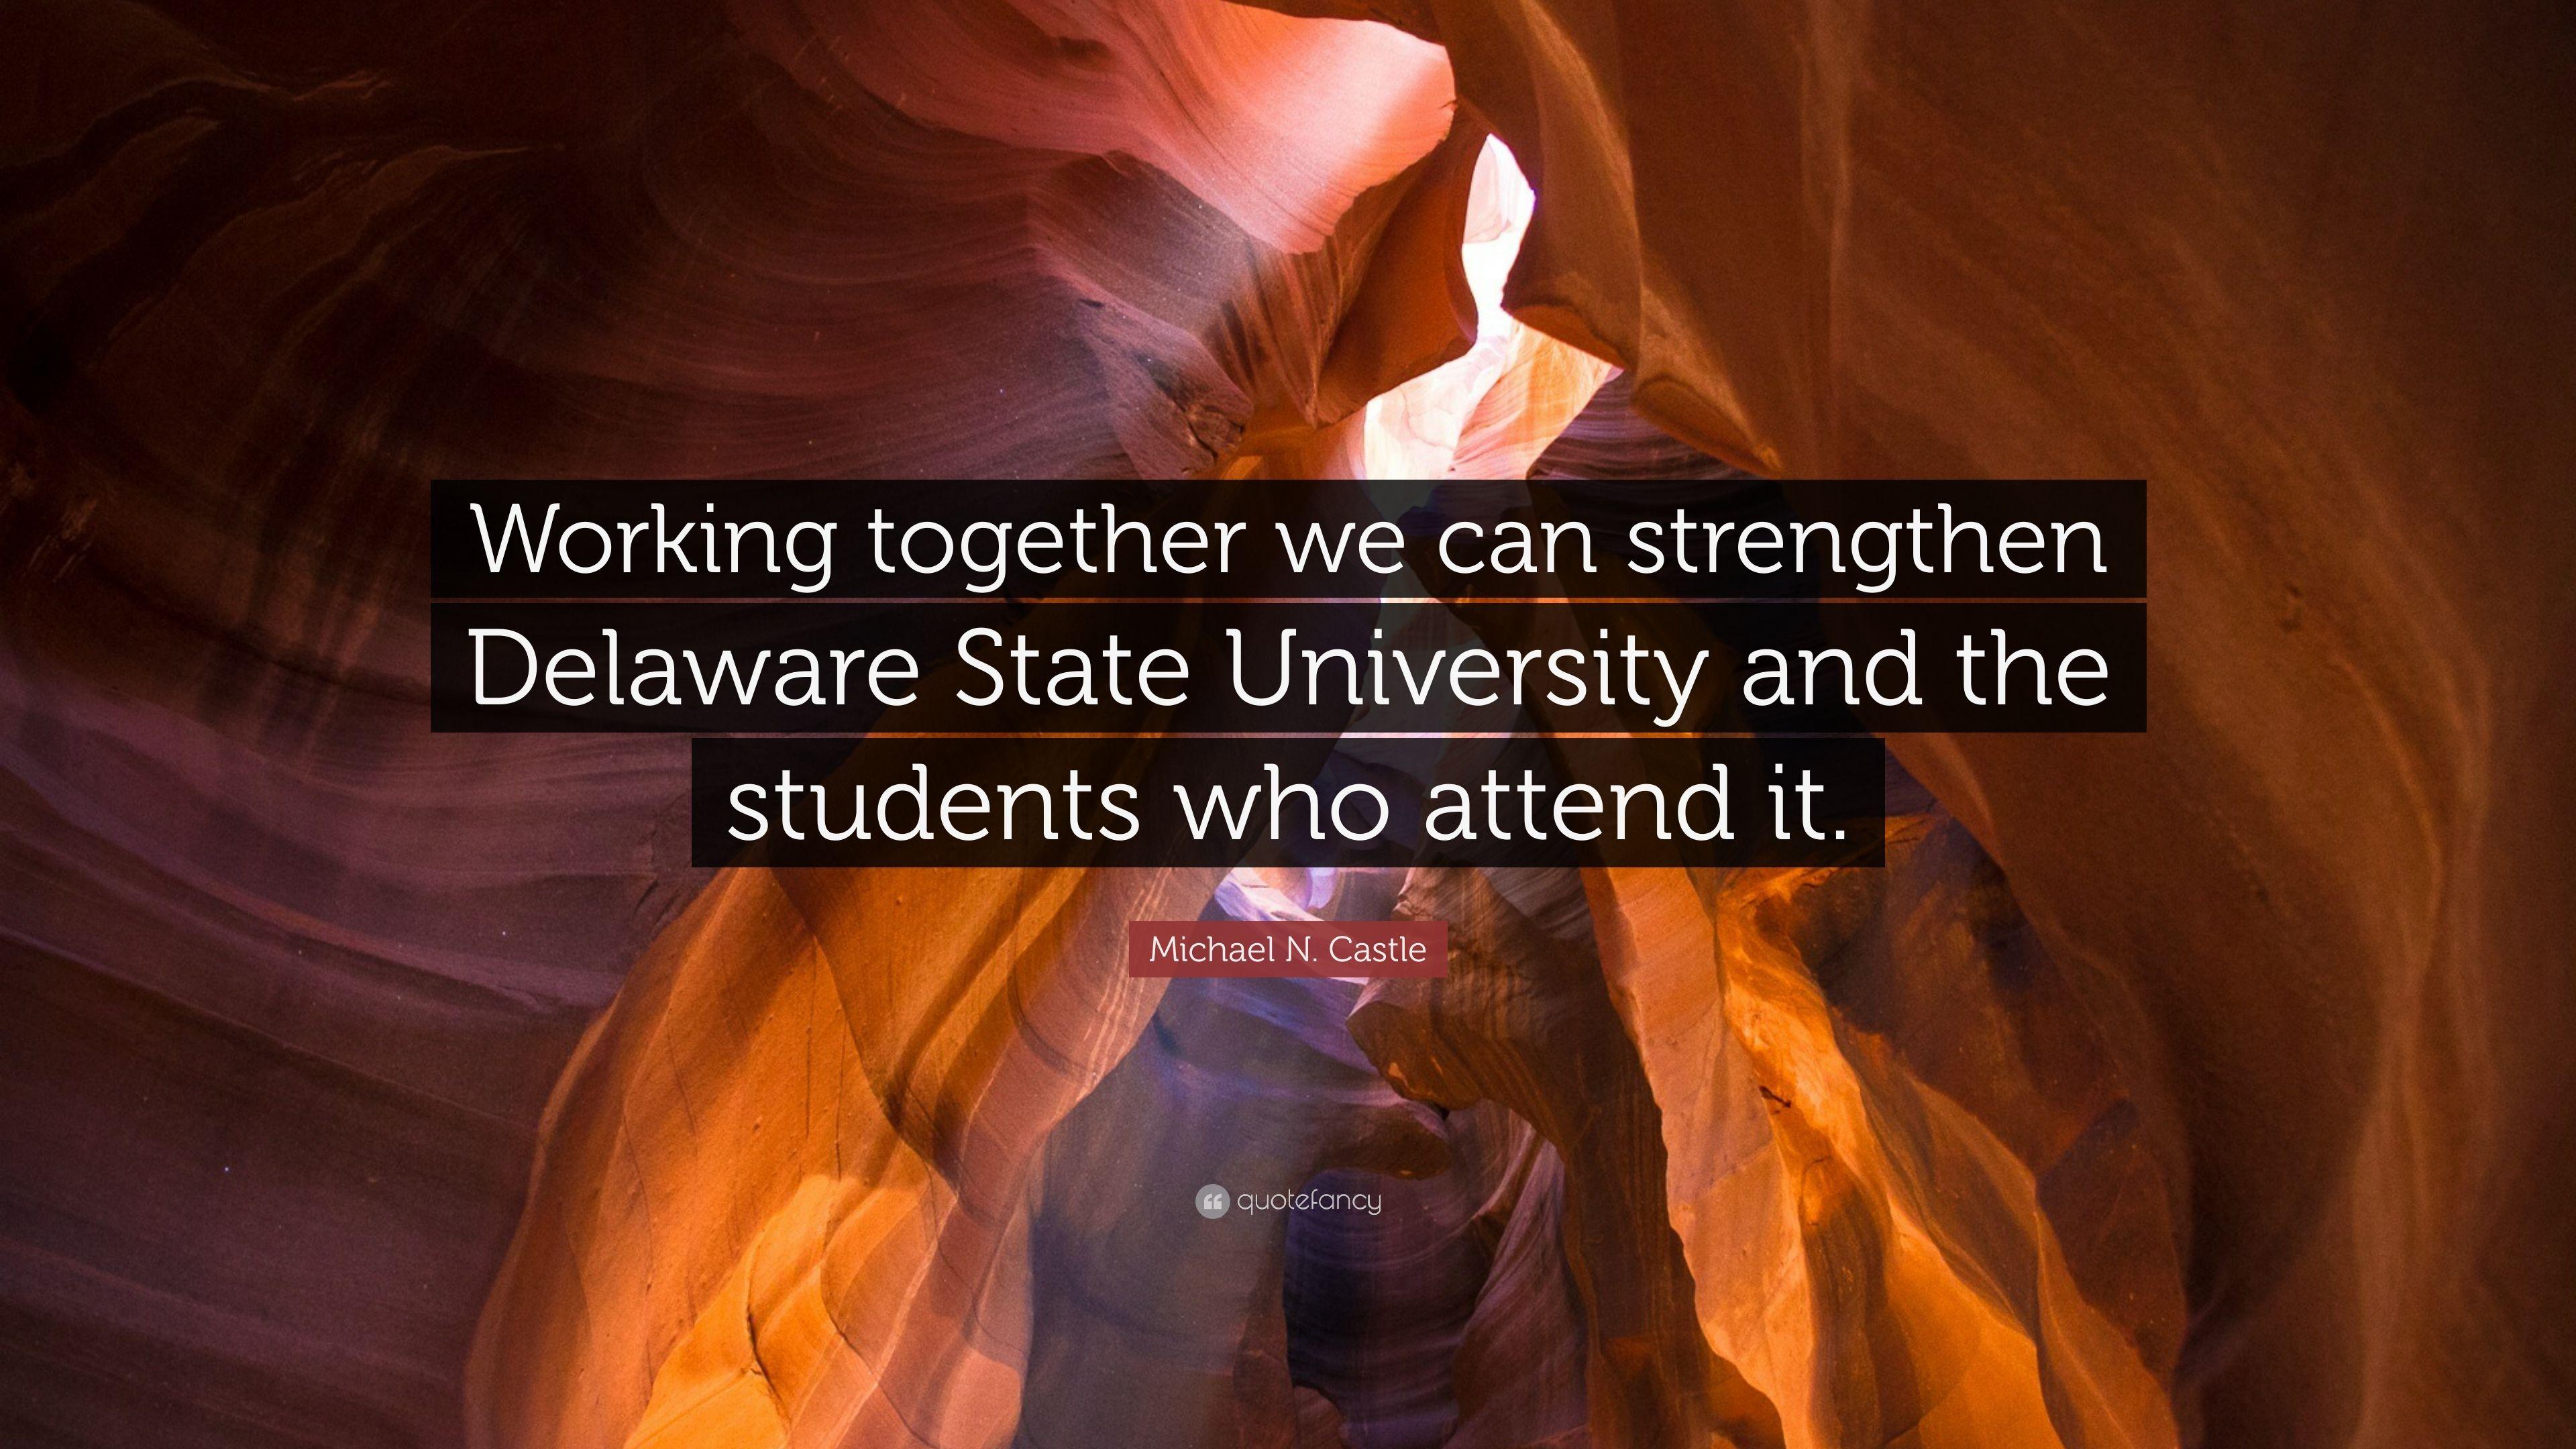 Michael N. Castle Quote: “Working together we can strengthen